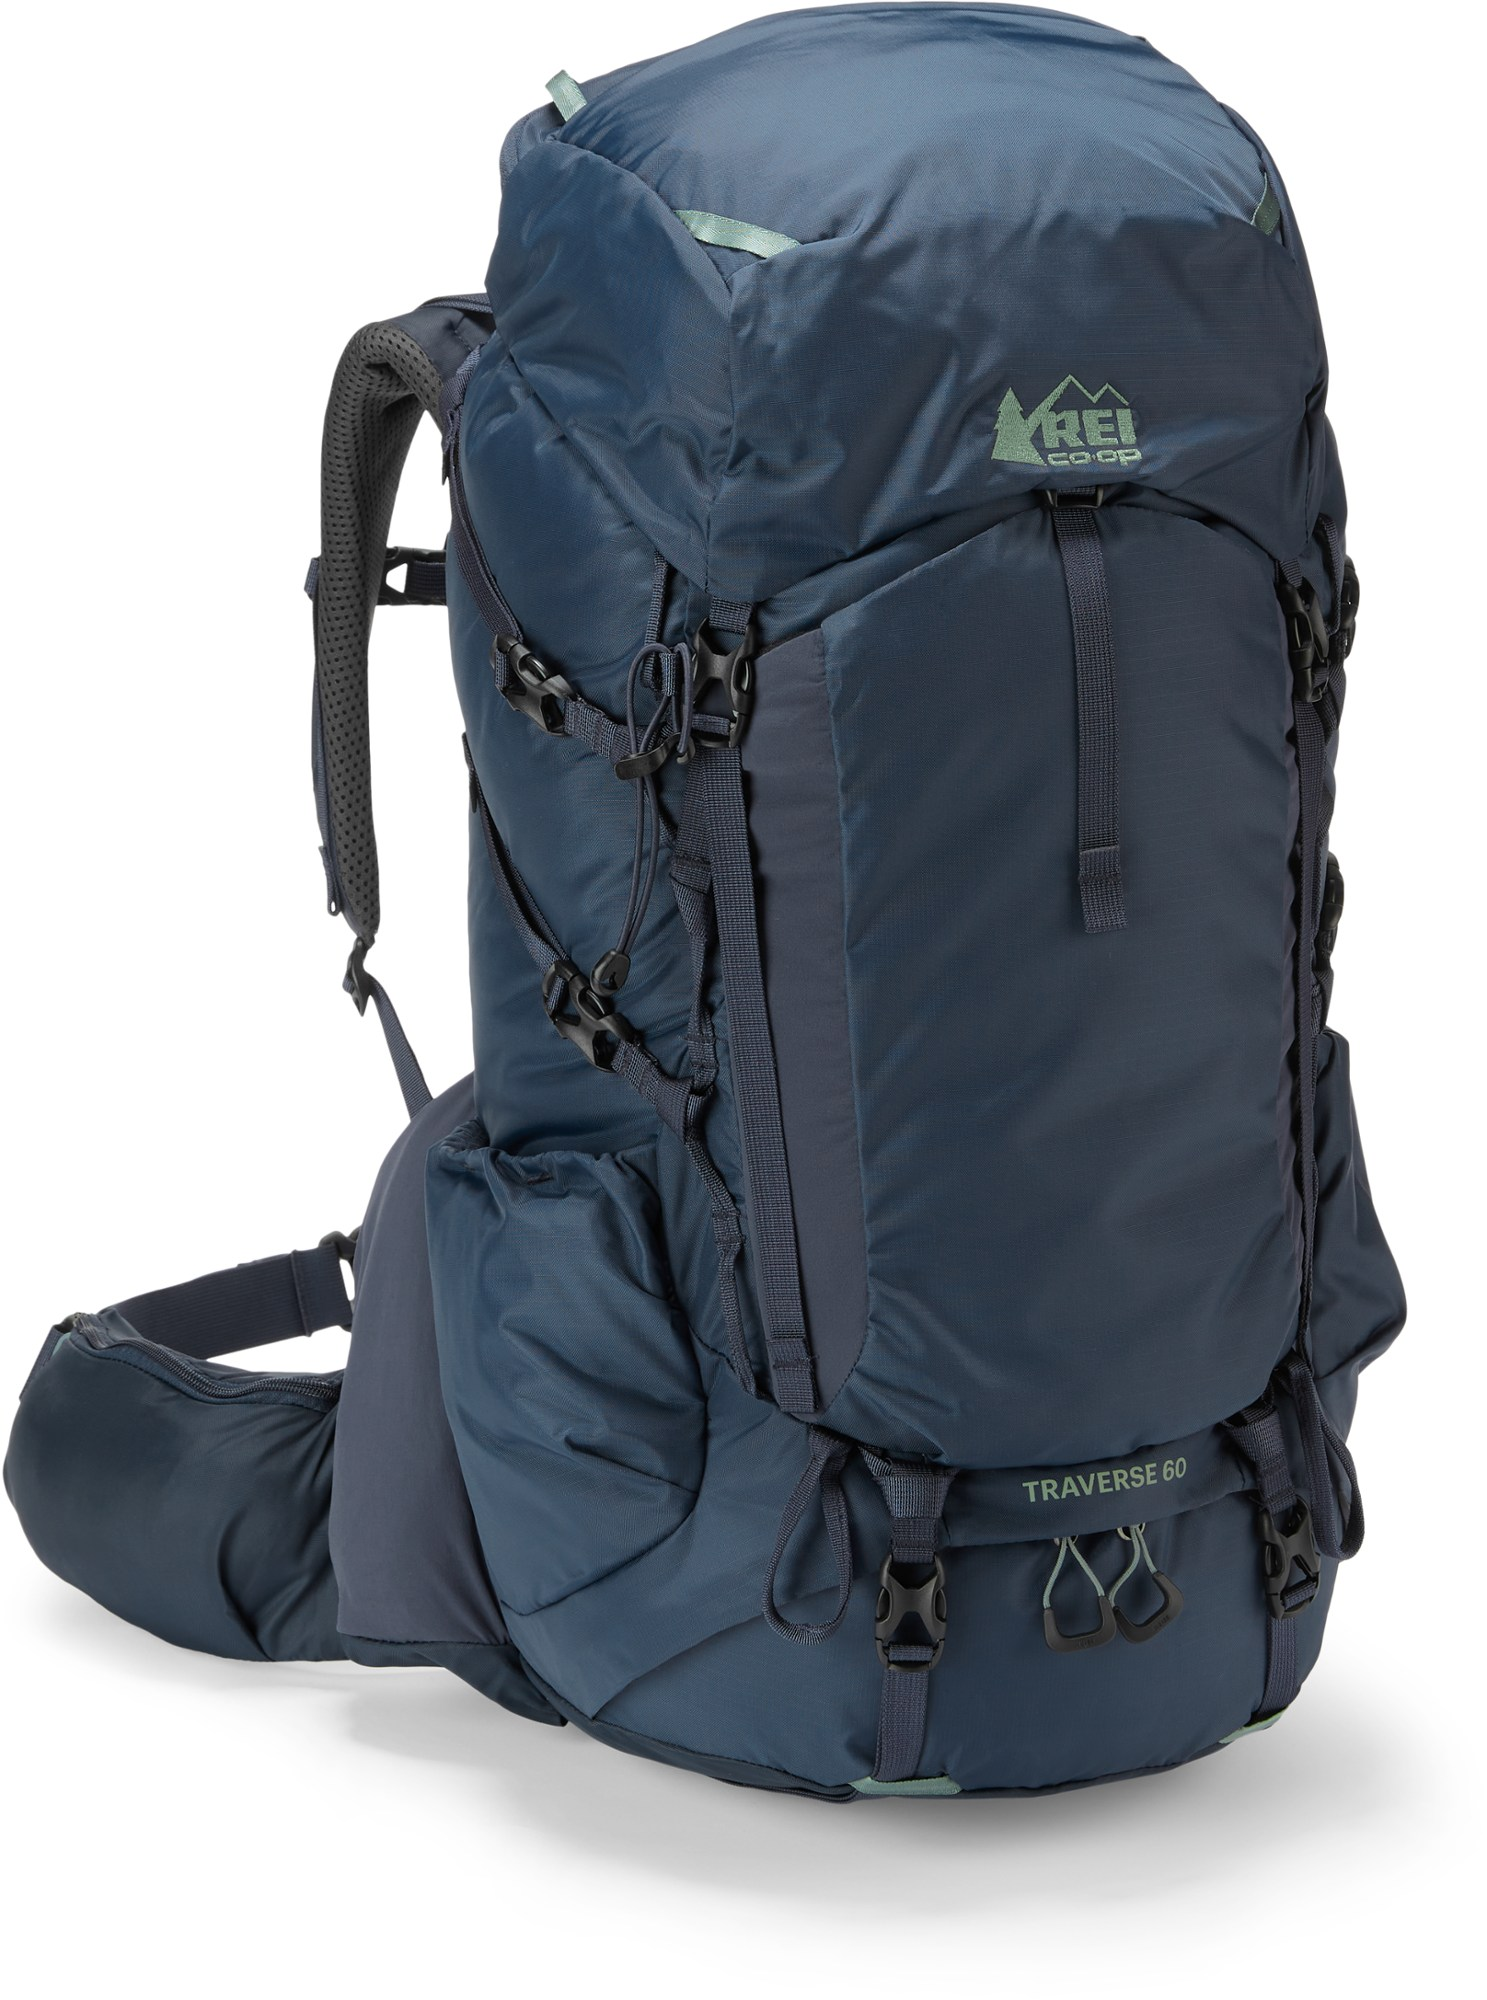 60L backpack for multi days hike